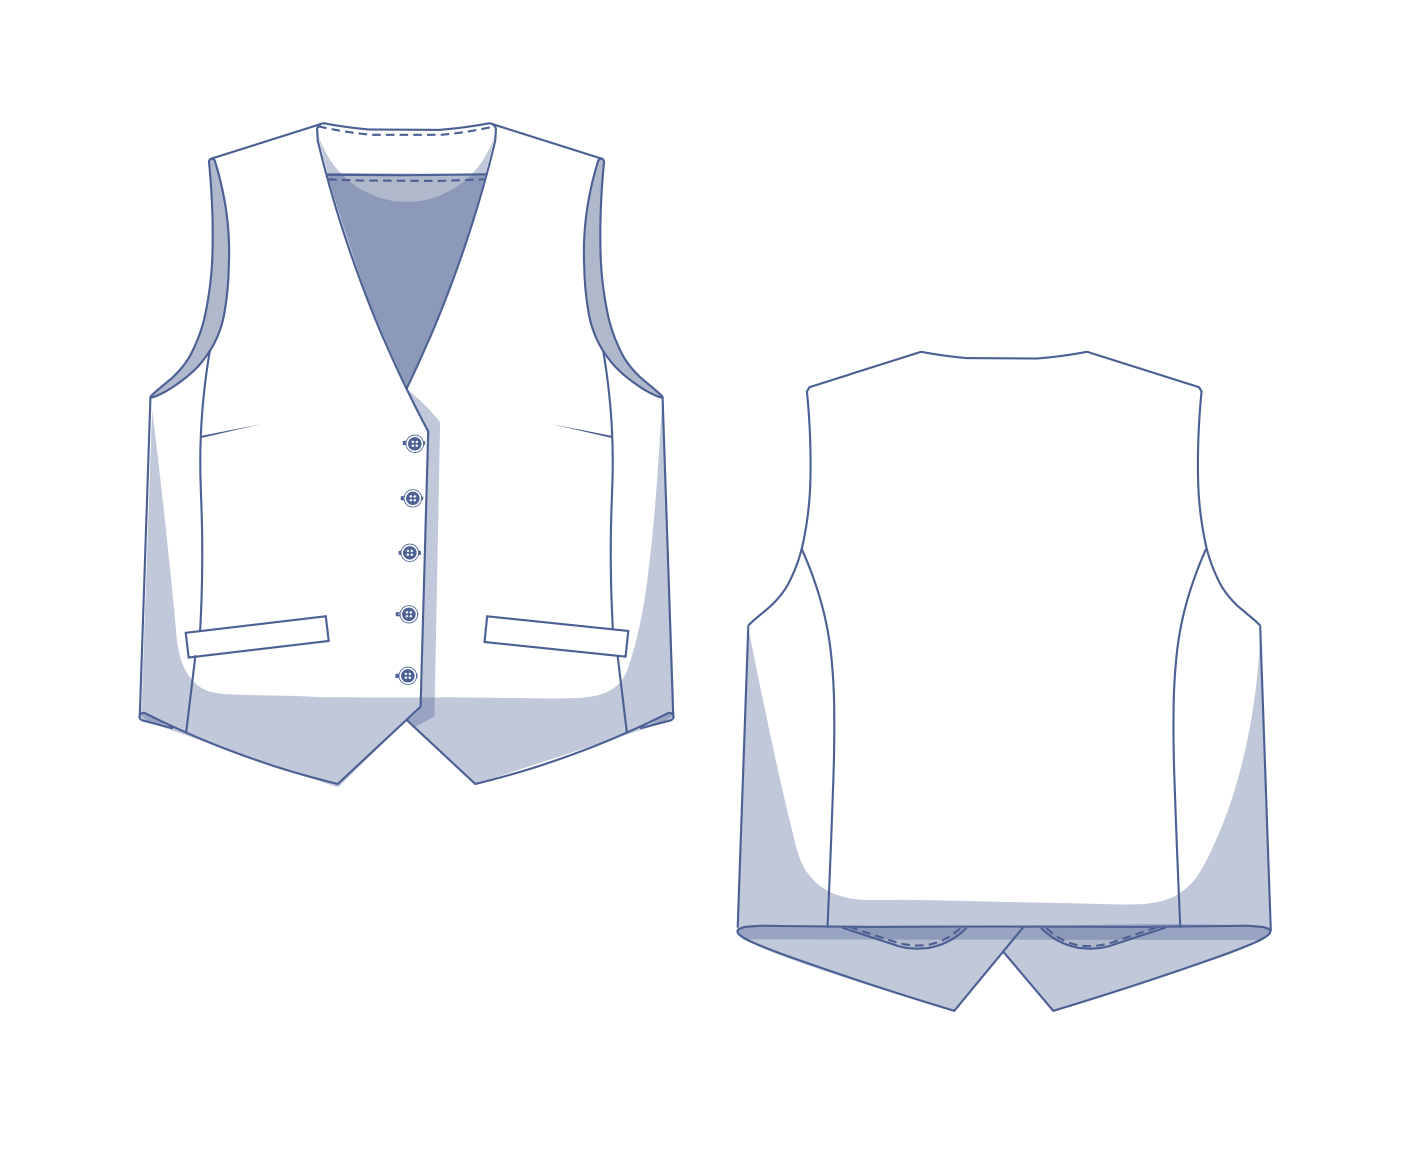 Lapelled Vest Waistcoat Technical Fashion Illustration With Sleeveless,  Notched Shawl Collar, Button-up Closure, Pockets. Flat Template Front,  Back, White Color Style. Women, Men Unisex Top CAD Mockup Royalty Free SVG,  Cliparts, Vectors,